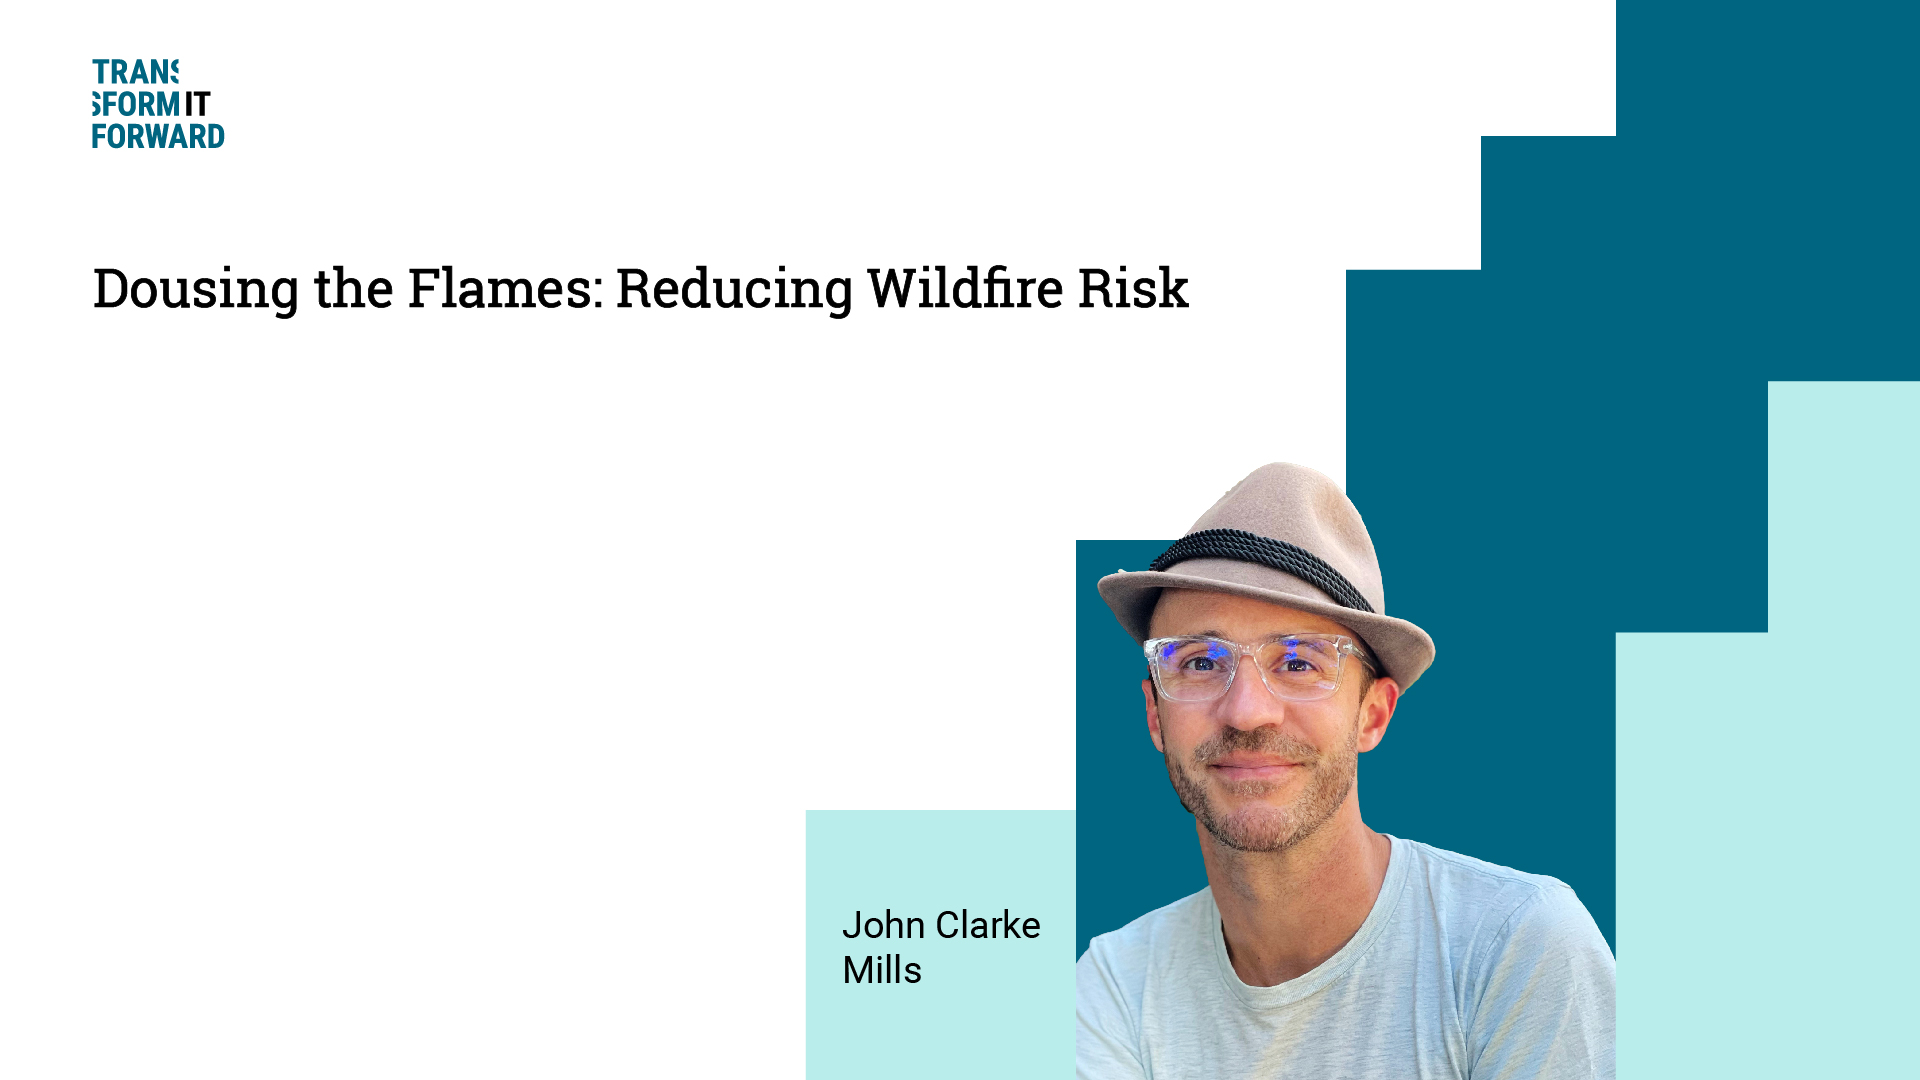 Dousing the flames: reducing wildfire risk